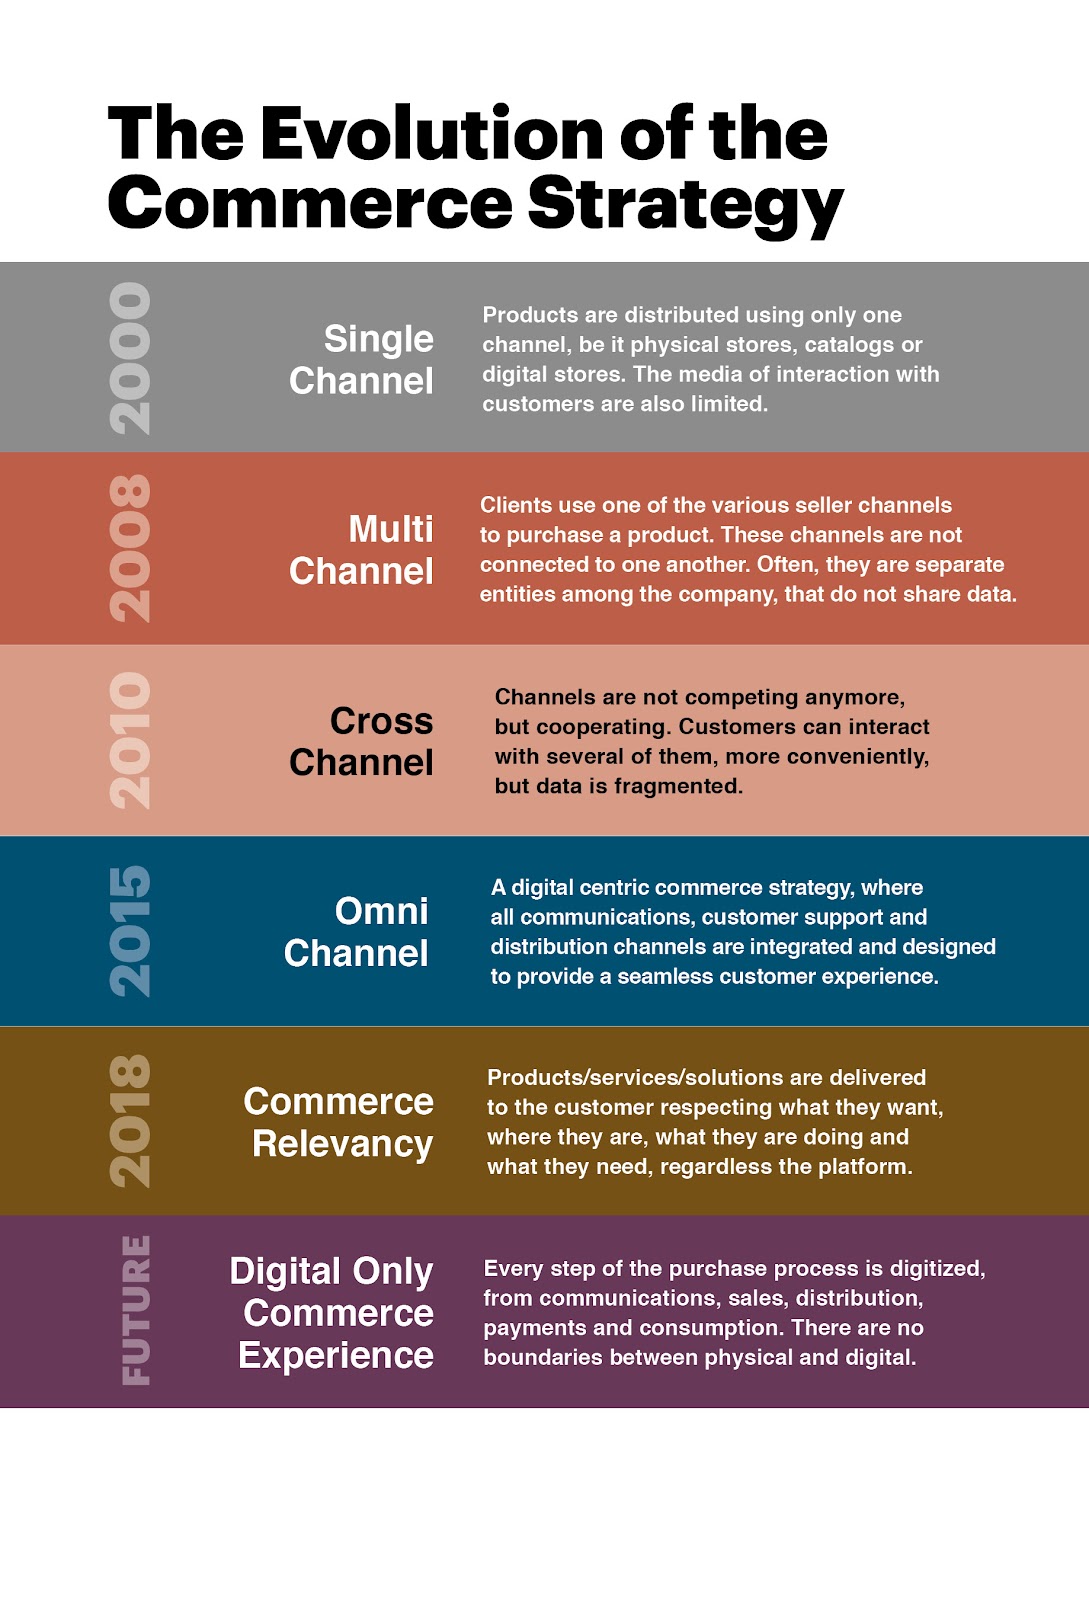 The Evolution of the Commerce Strategy. From Single Channel in 2000 to a Digital Only Commerce Experience in the future.